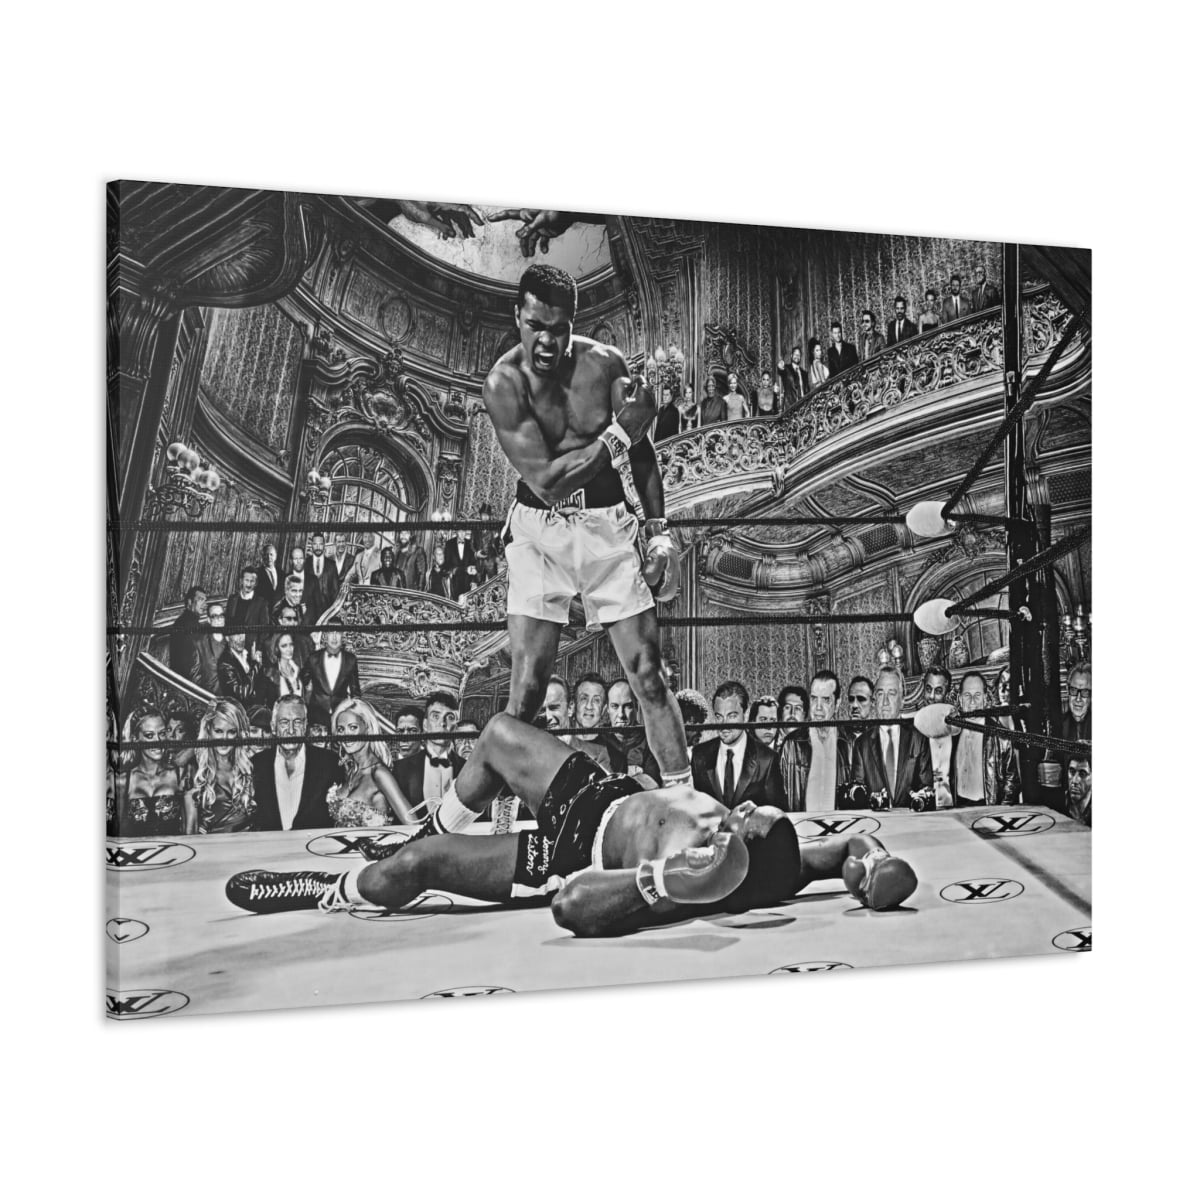 Geezers Printed Boxing Ring Canvas